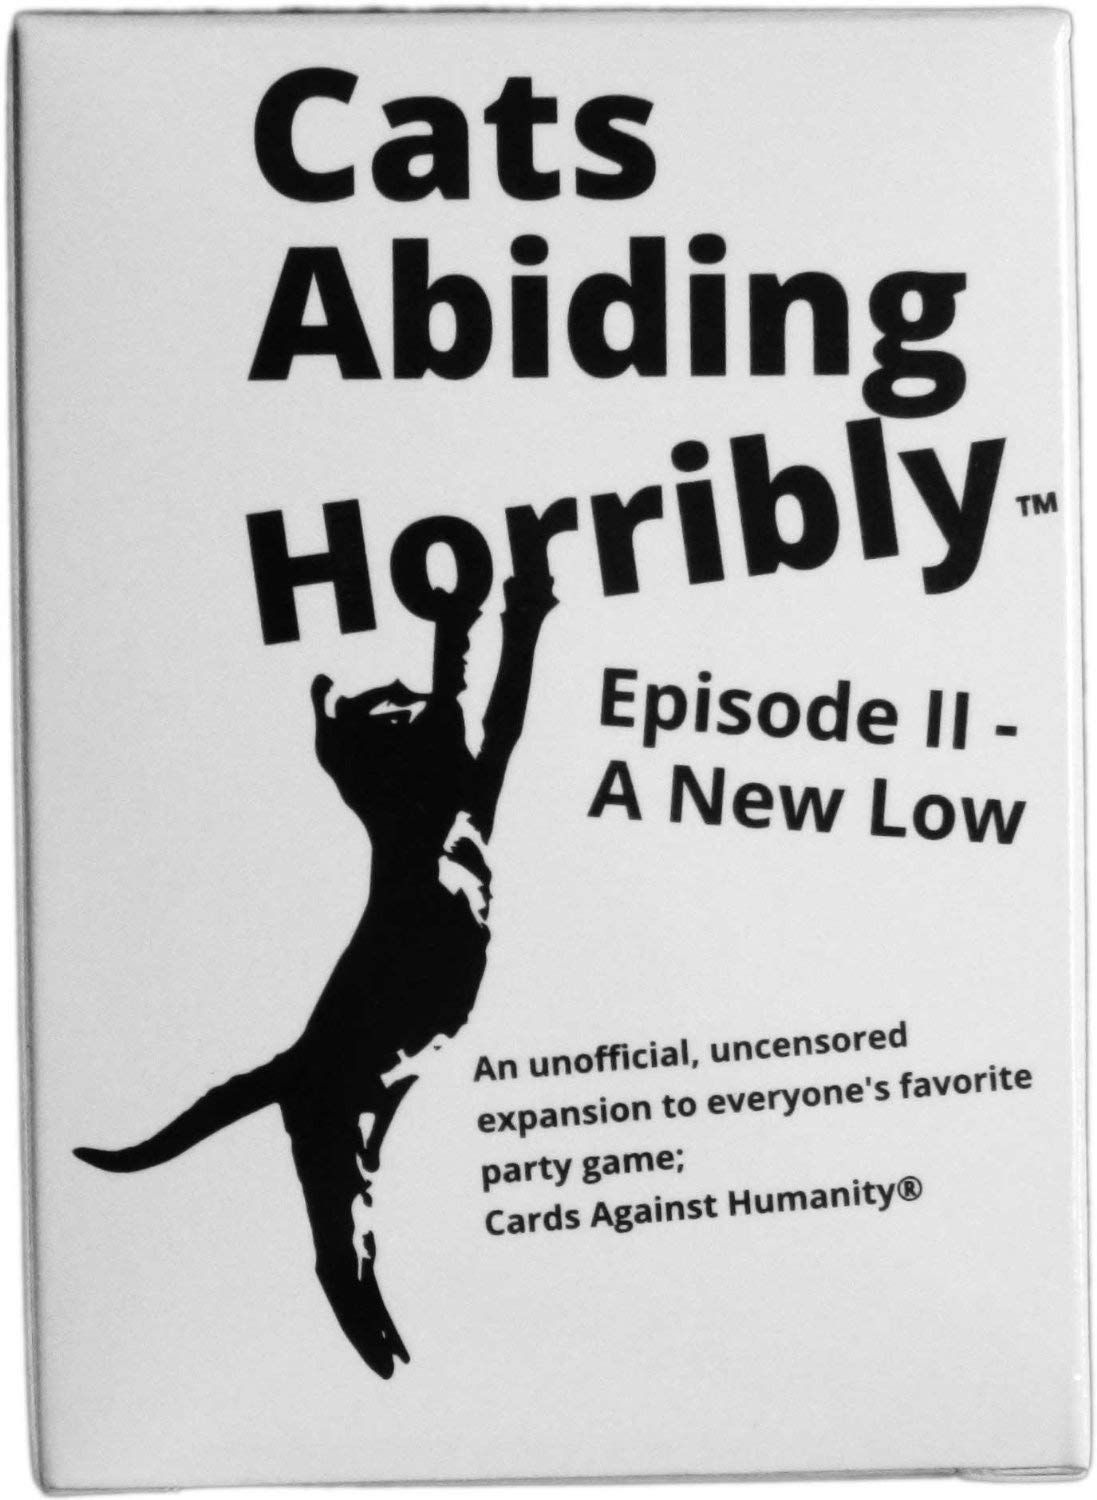 Cats Abiding Horribly: Episode II – A New Low (fan expansion for Cards Against Humanity)